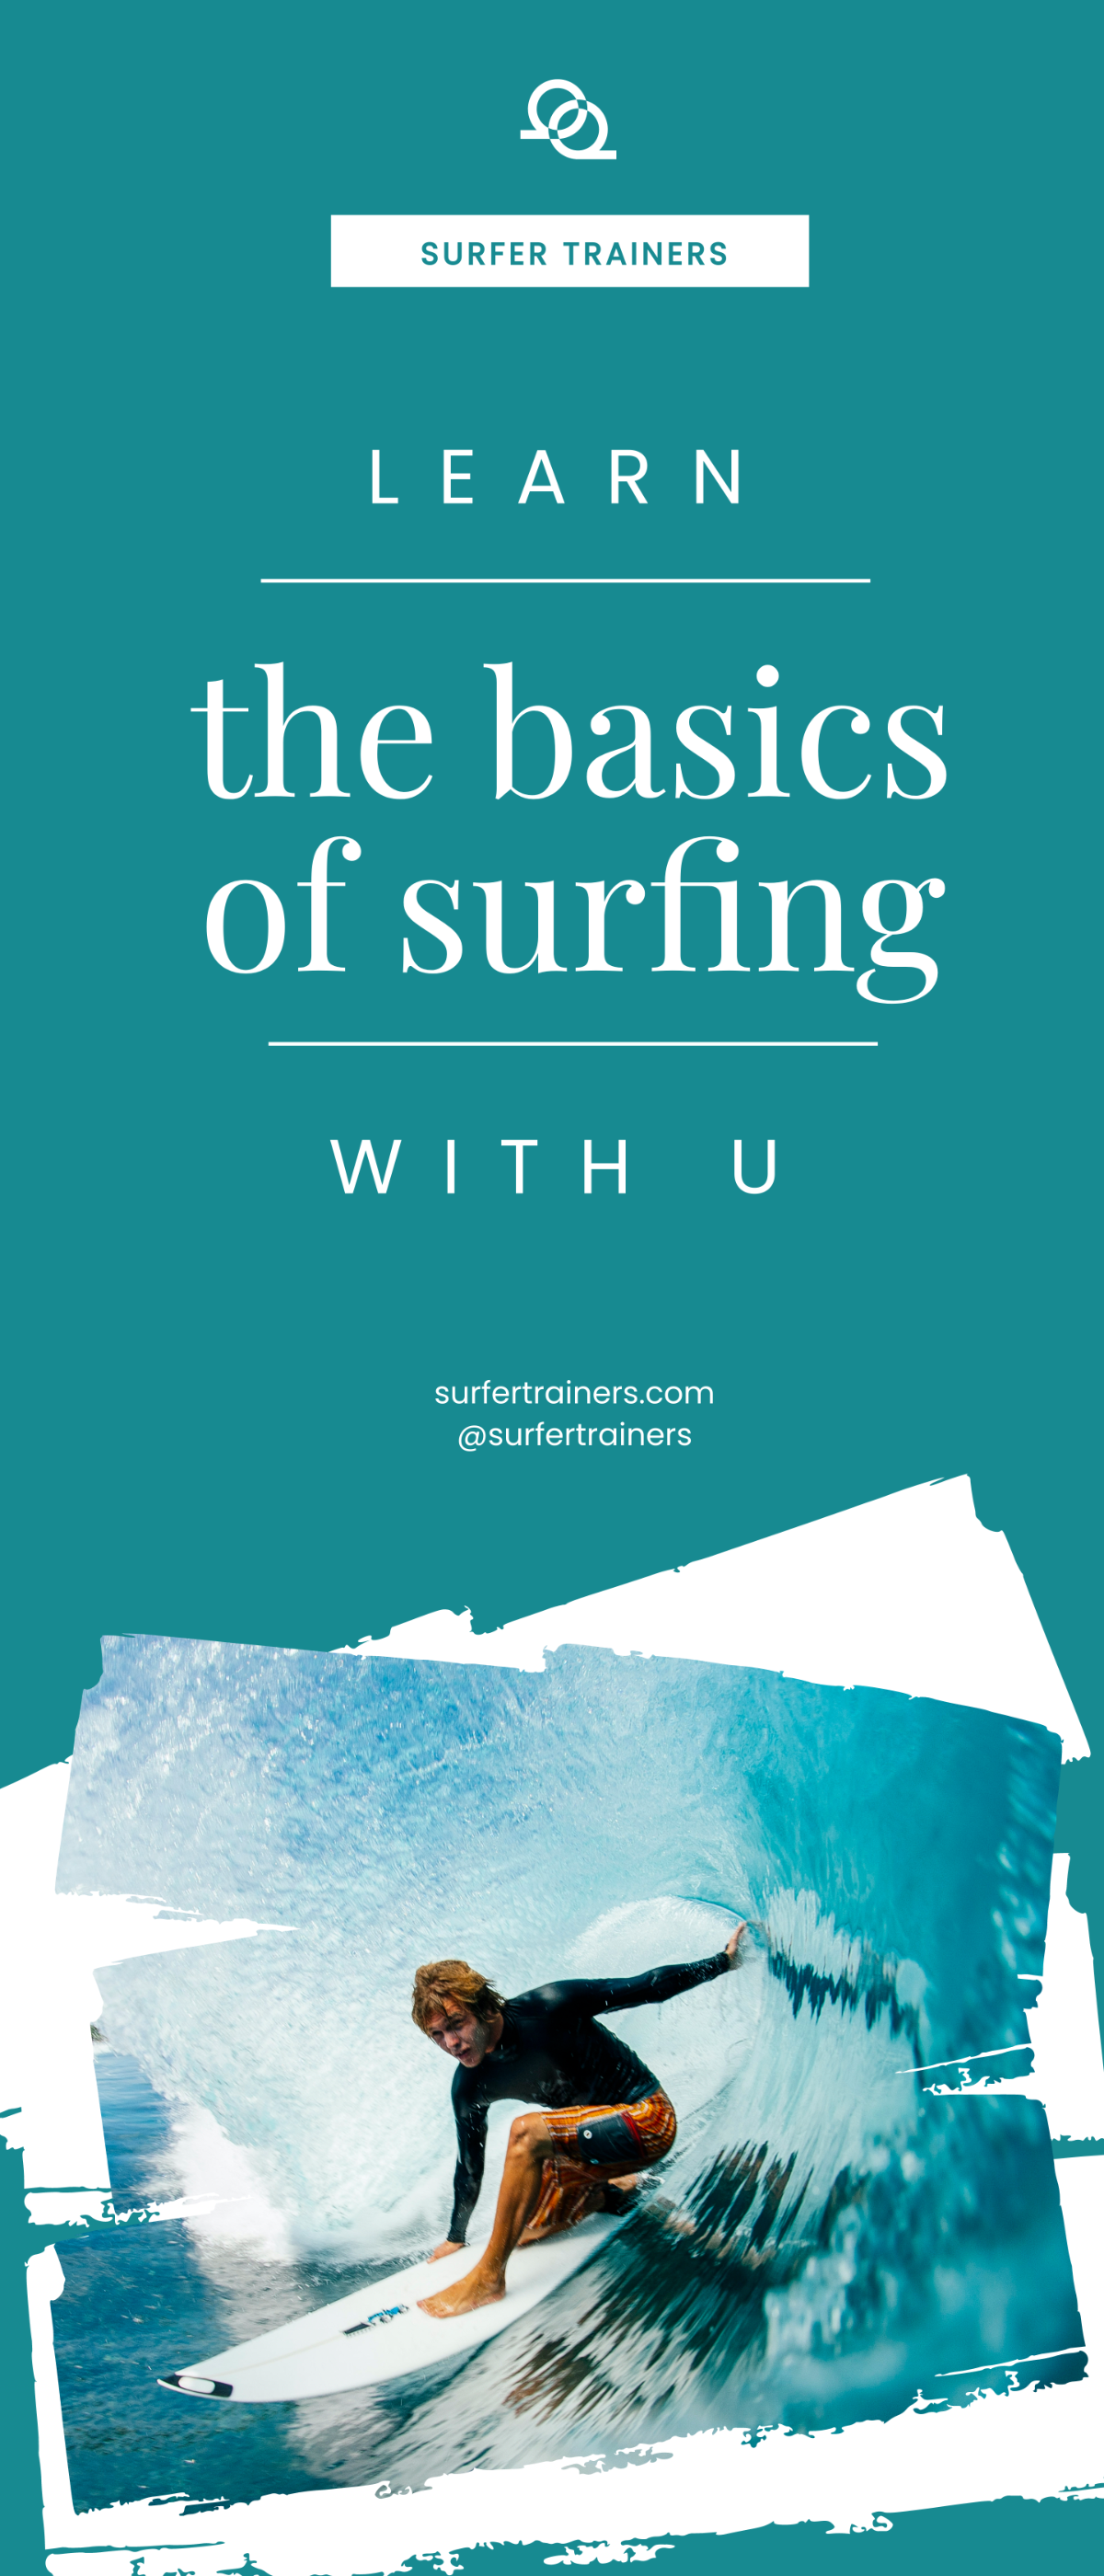 Free Surf Training Roll Up Banner Template